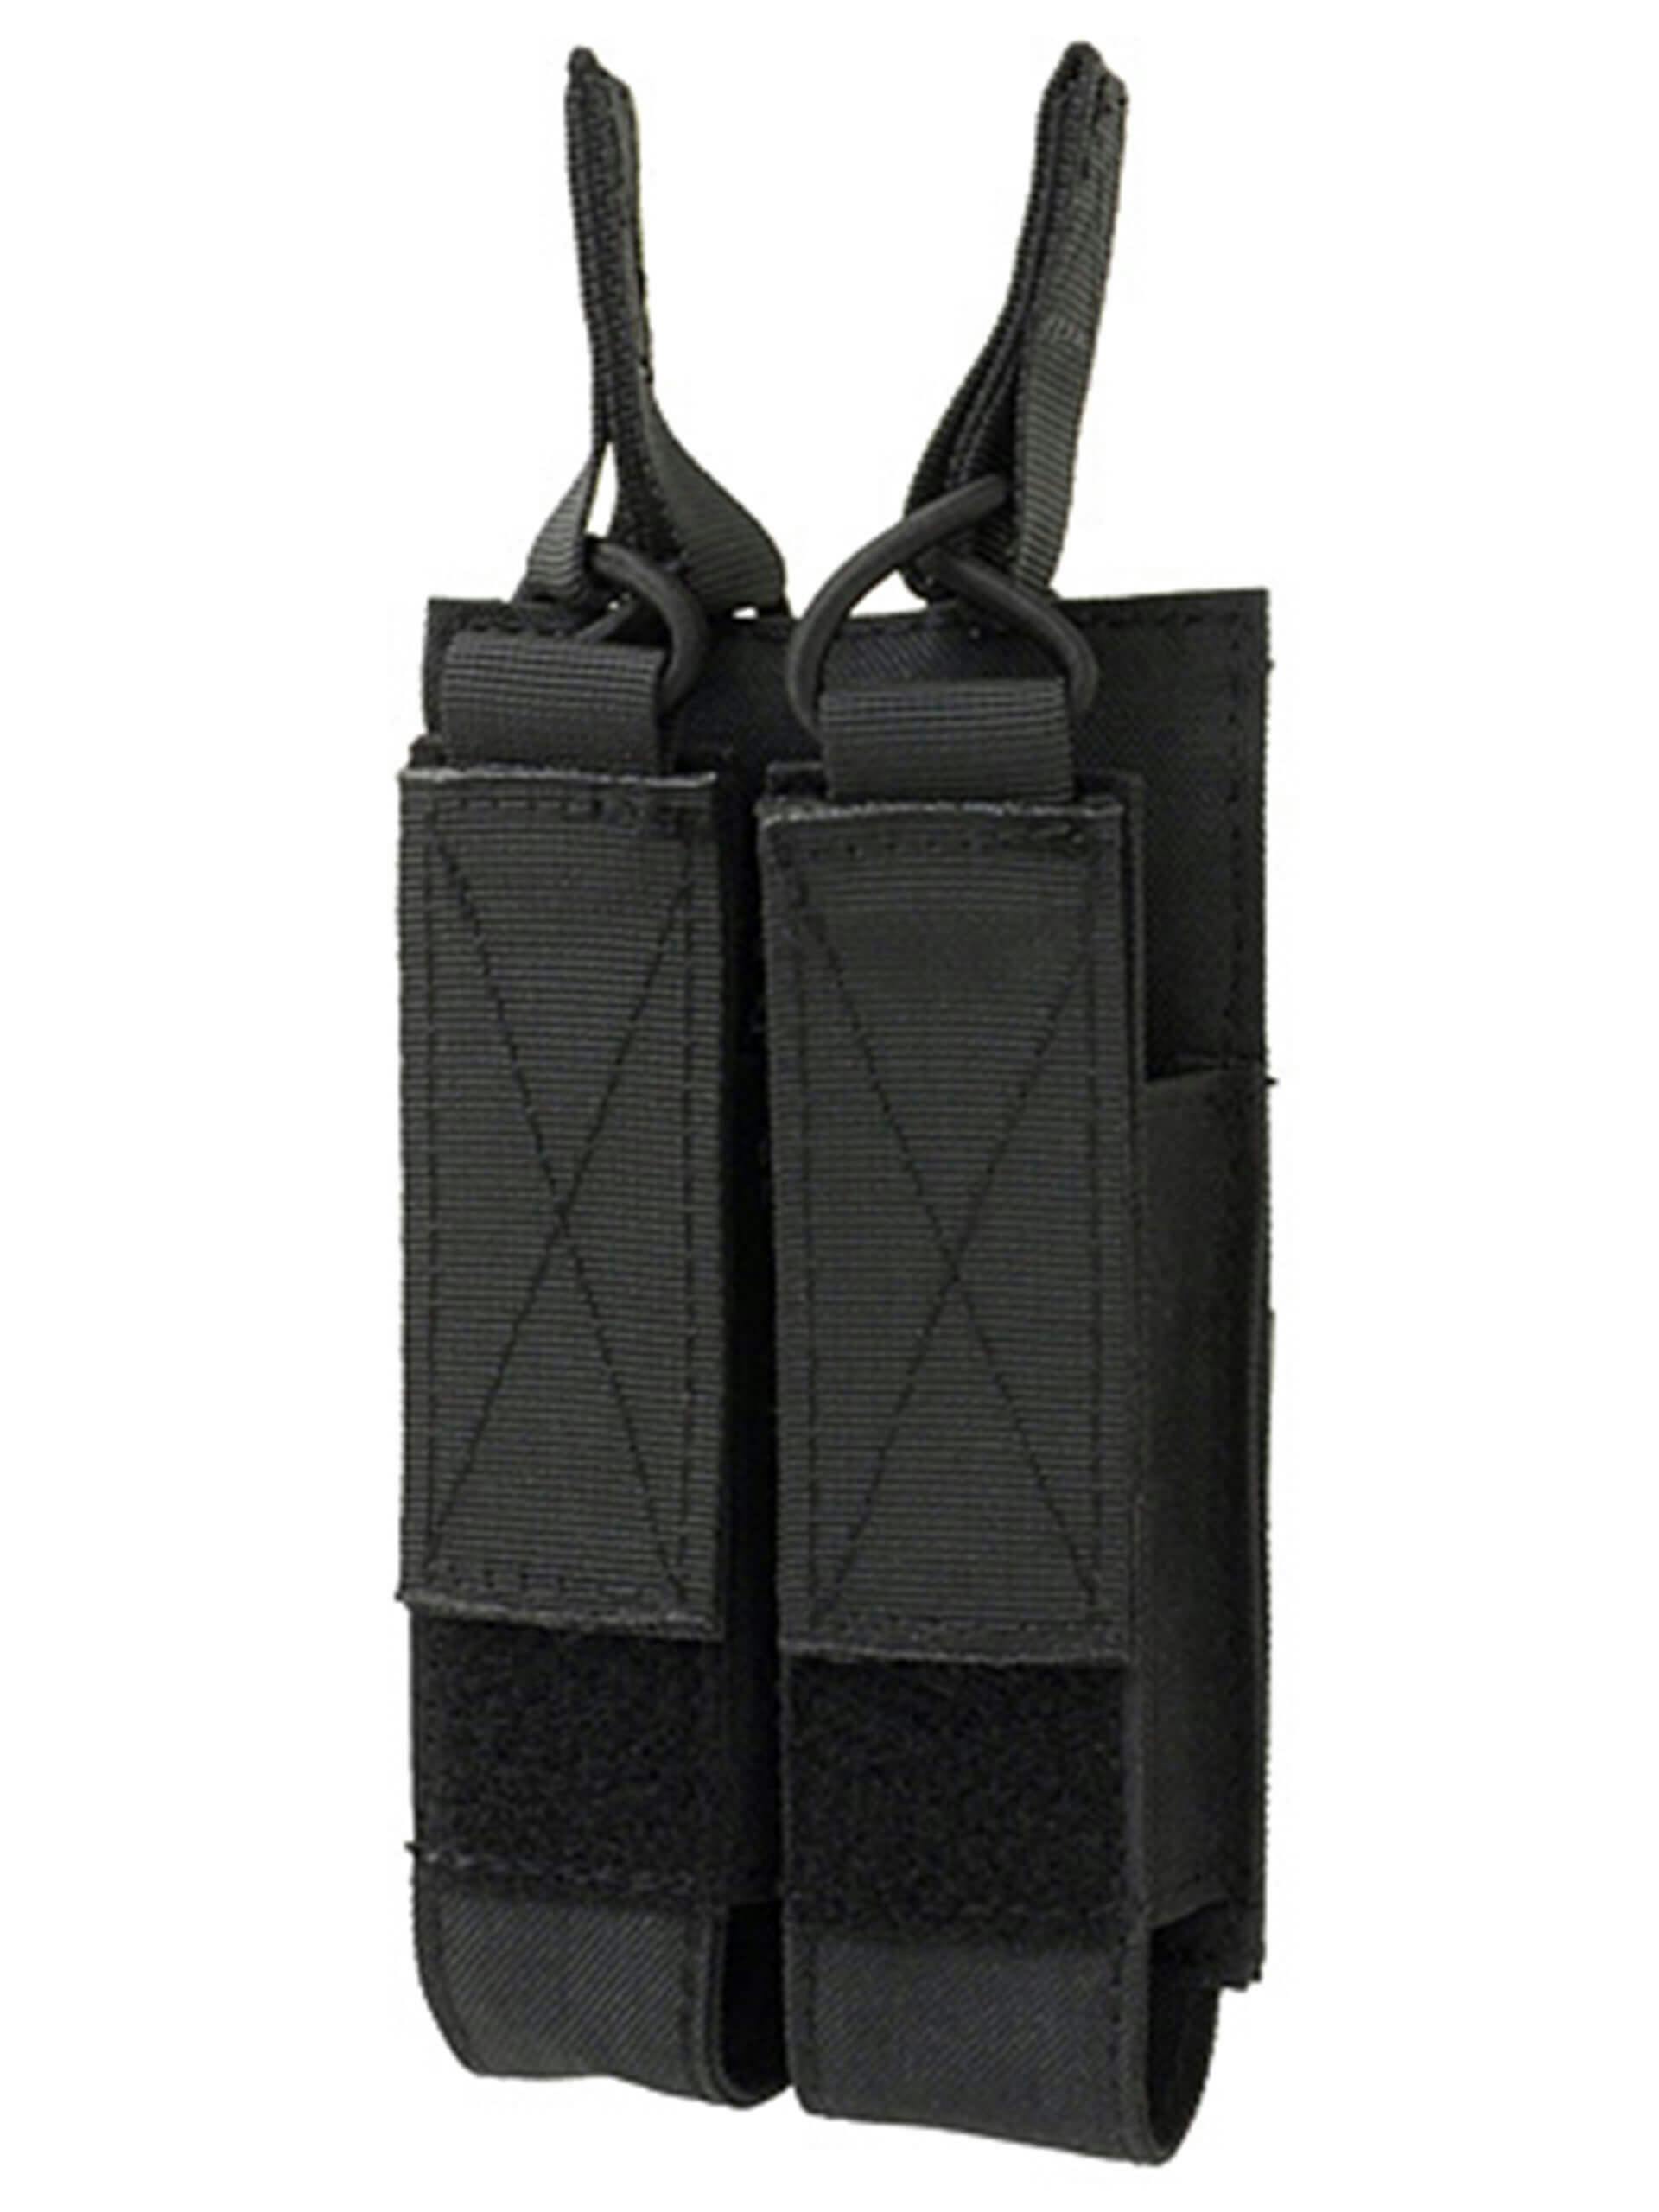 TMC Rifle Magazine Pouch MOLLE Mag Carrier Poly 5.56mm 7.62Airsoft Gear Camo 